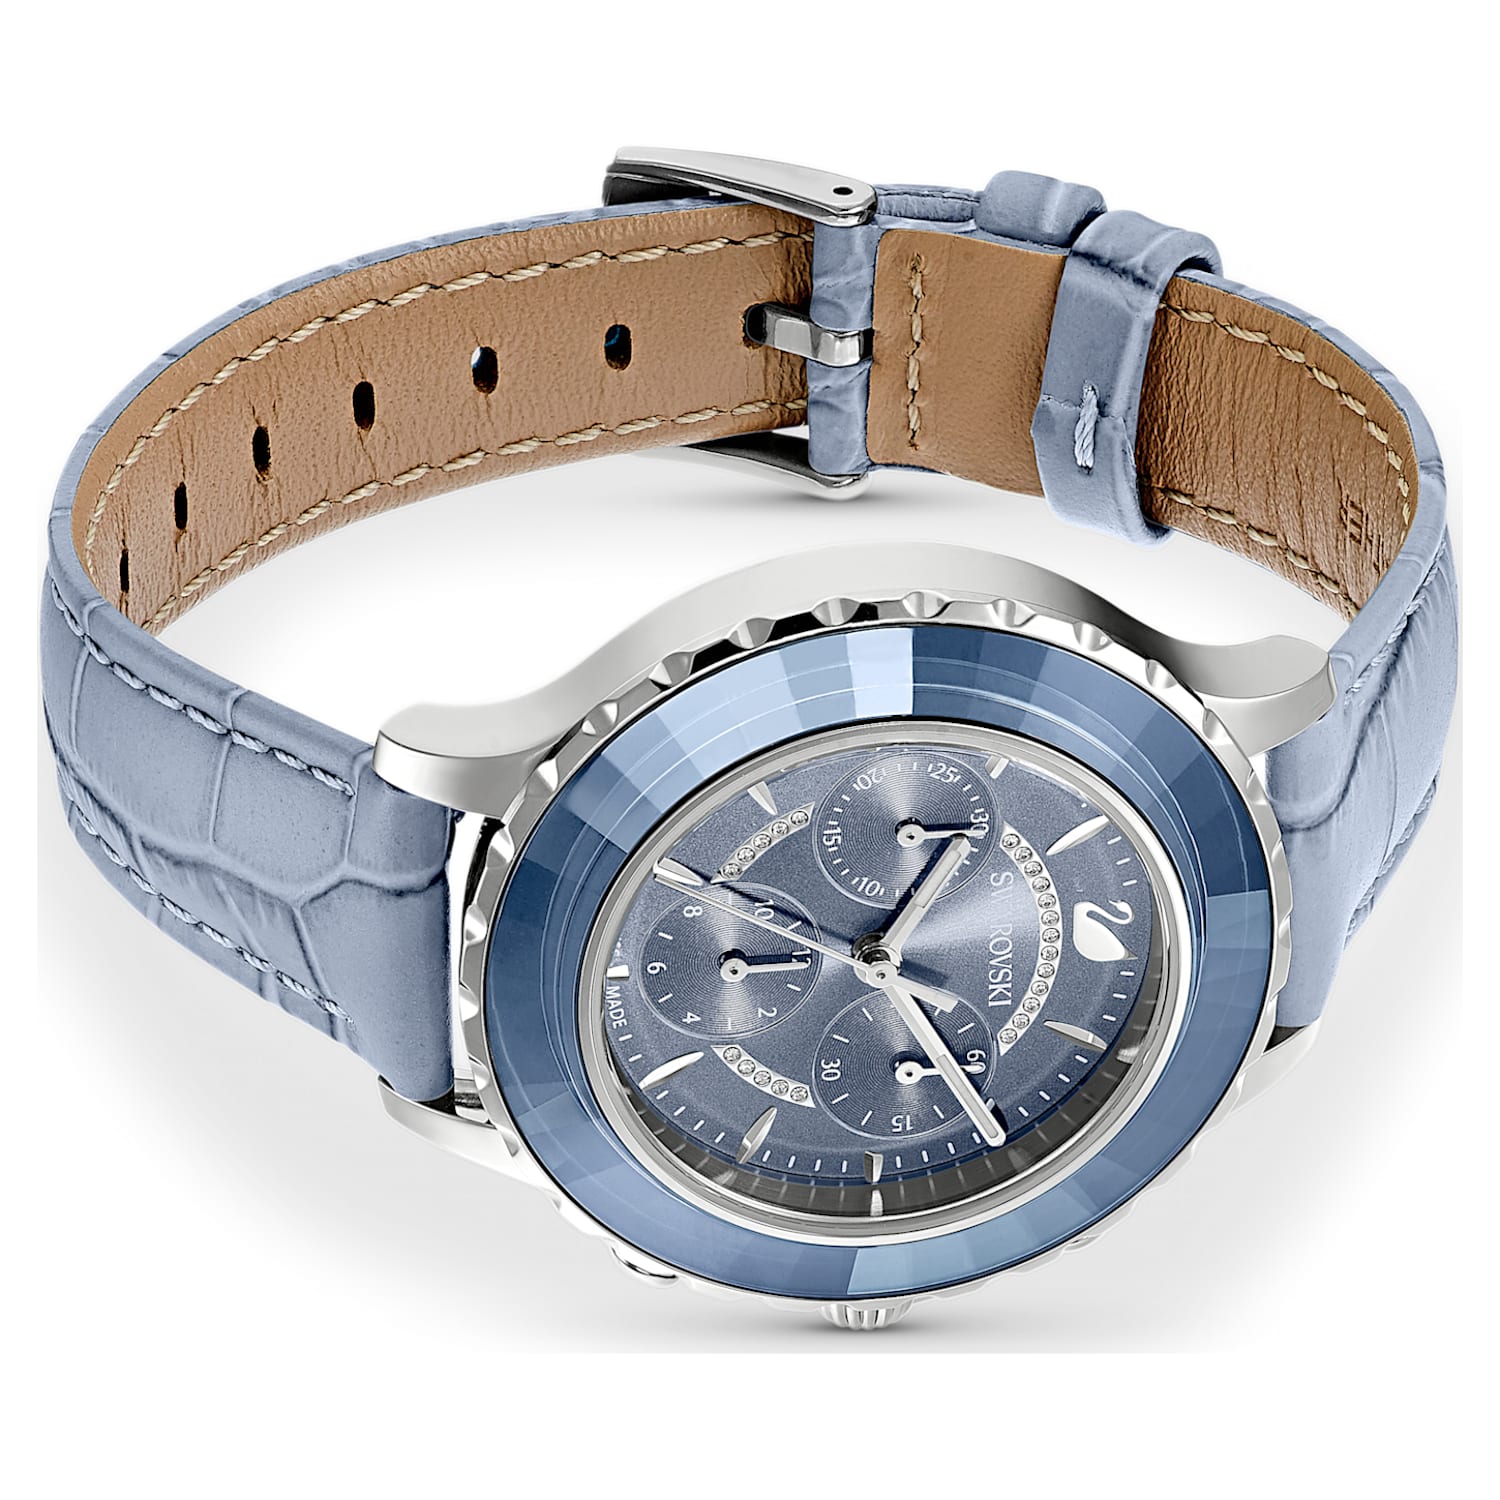 Octea Lux Chrono watch, Leather strap, Blue, Stainless steel 